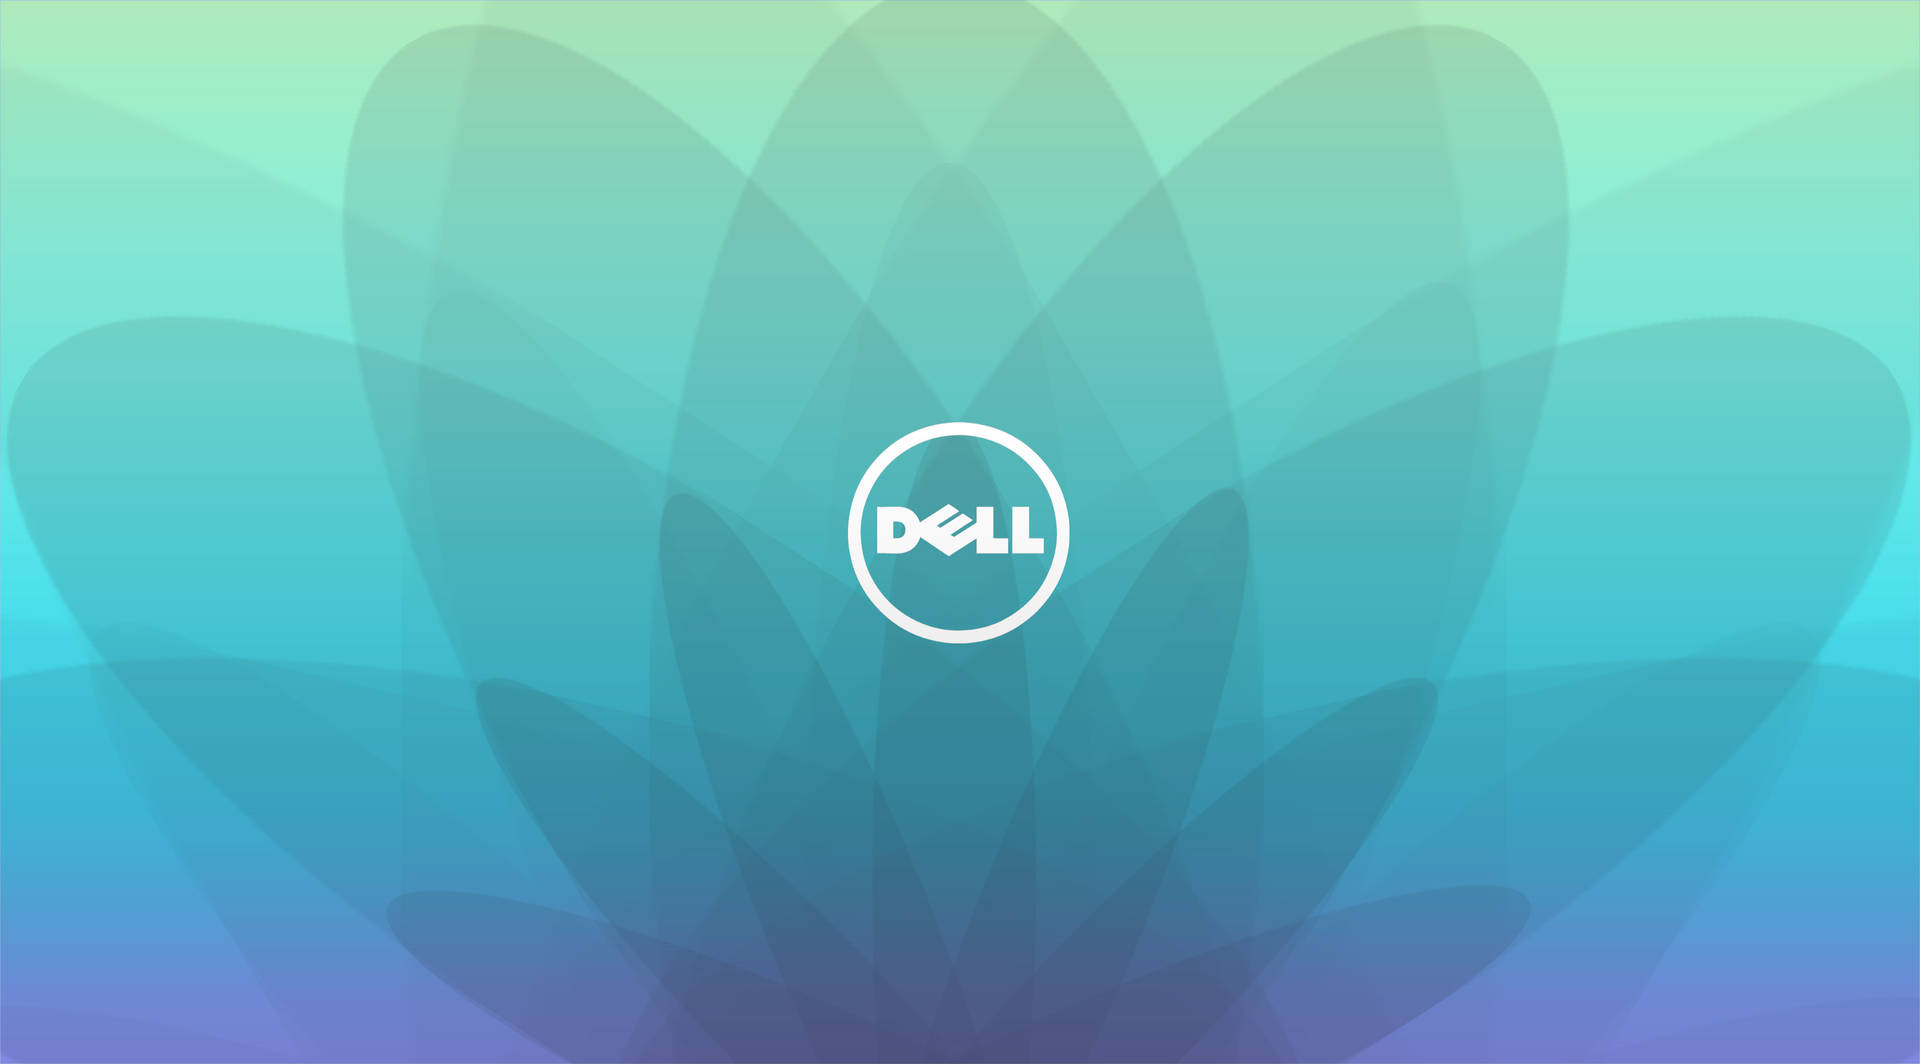 Cool Dell 4k Background